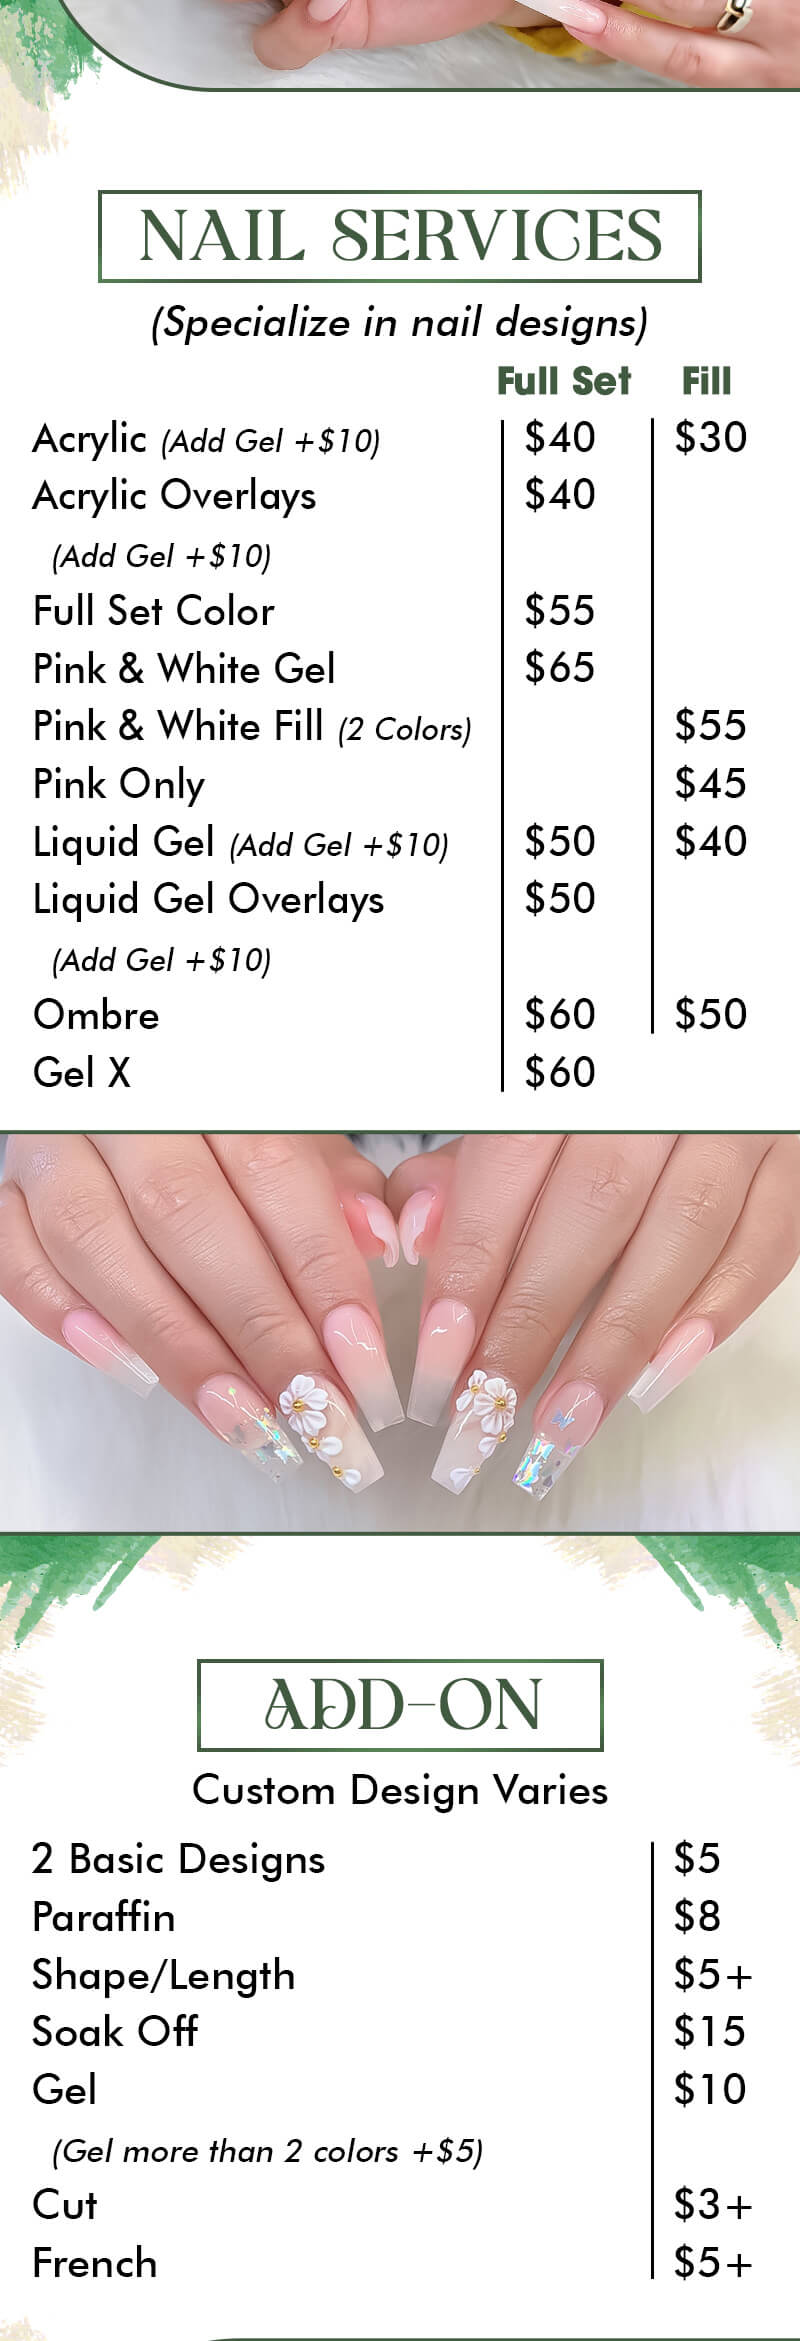 Nail Art by Anna - Seattle - Book Online - Prices, Reviews, Photos